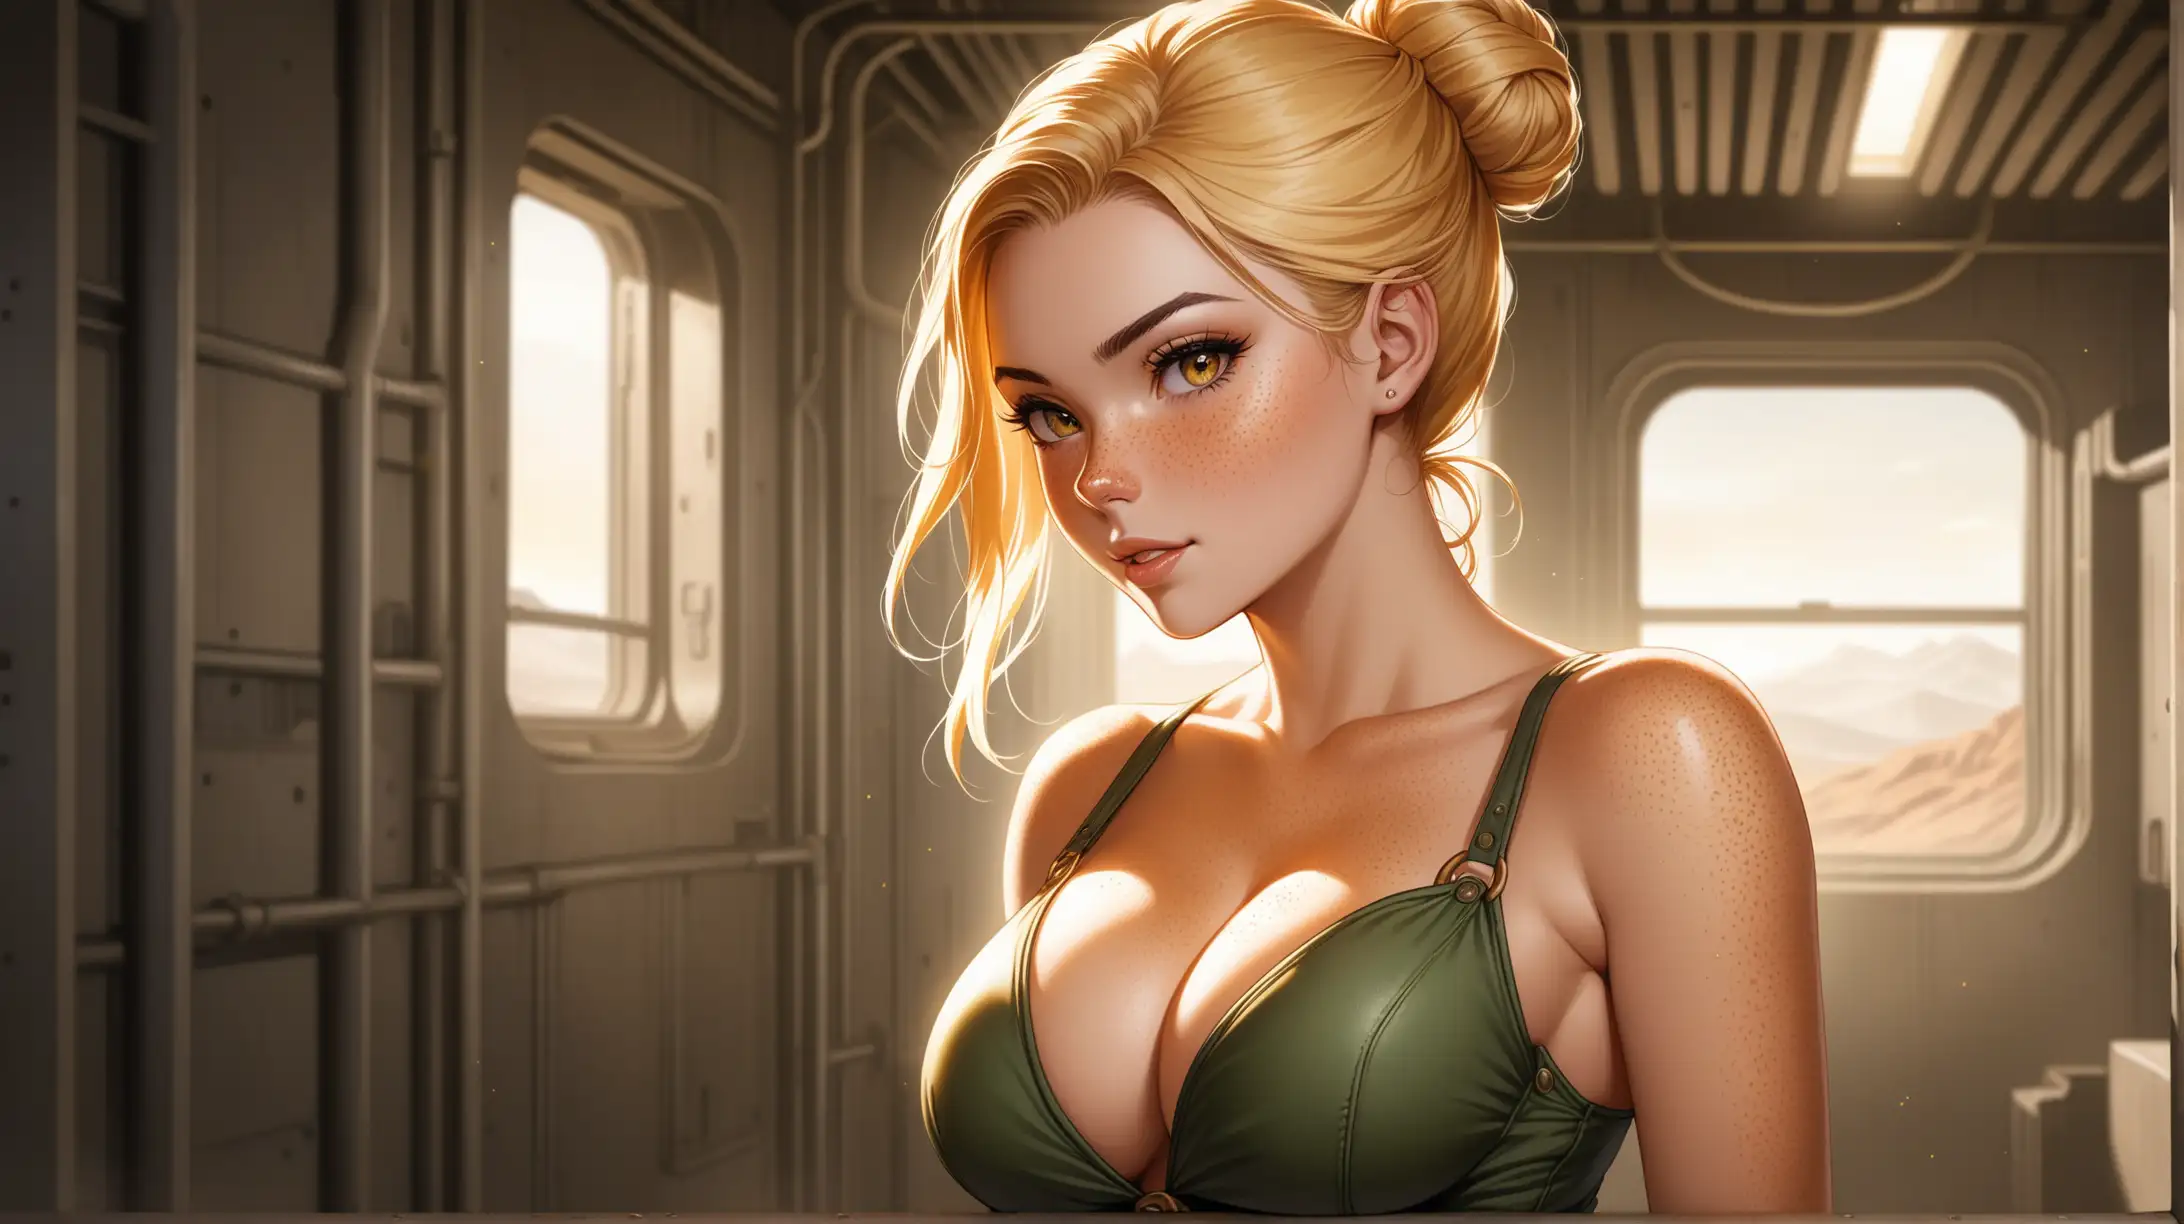 Draw a woman, long blonde hair in a bun, gold eyes, freckles, perky figure, outfit inspired from the Fallout series, high quality, cowboy shot, indoors, seductive, cleavage, natural lighting, loving gaze toward the viewer